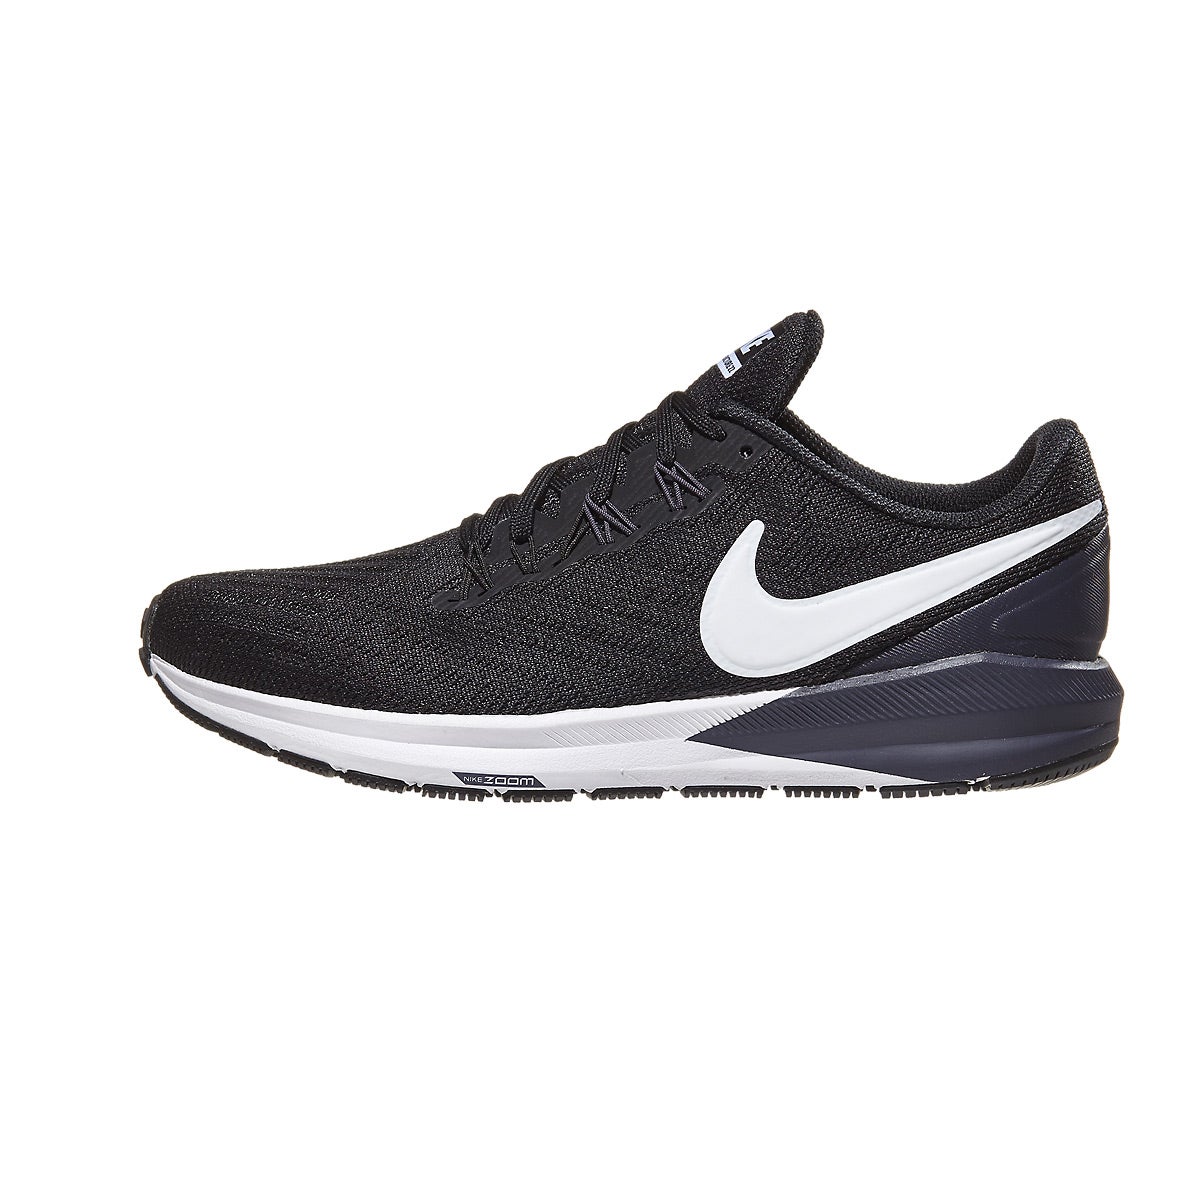 Nike Zoom Structure 22 Women's Shoes Black/Gridiron 360° View | Running ...